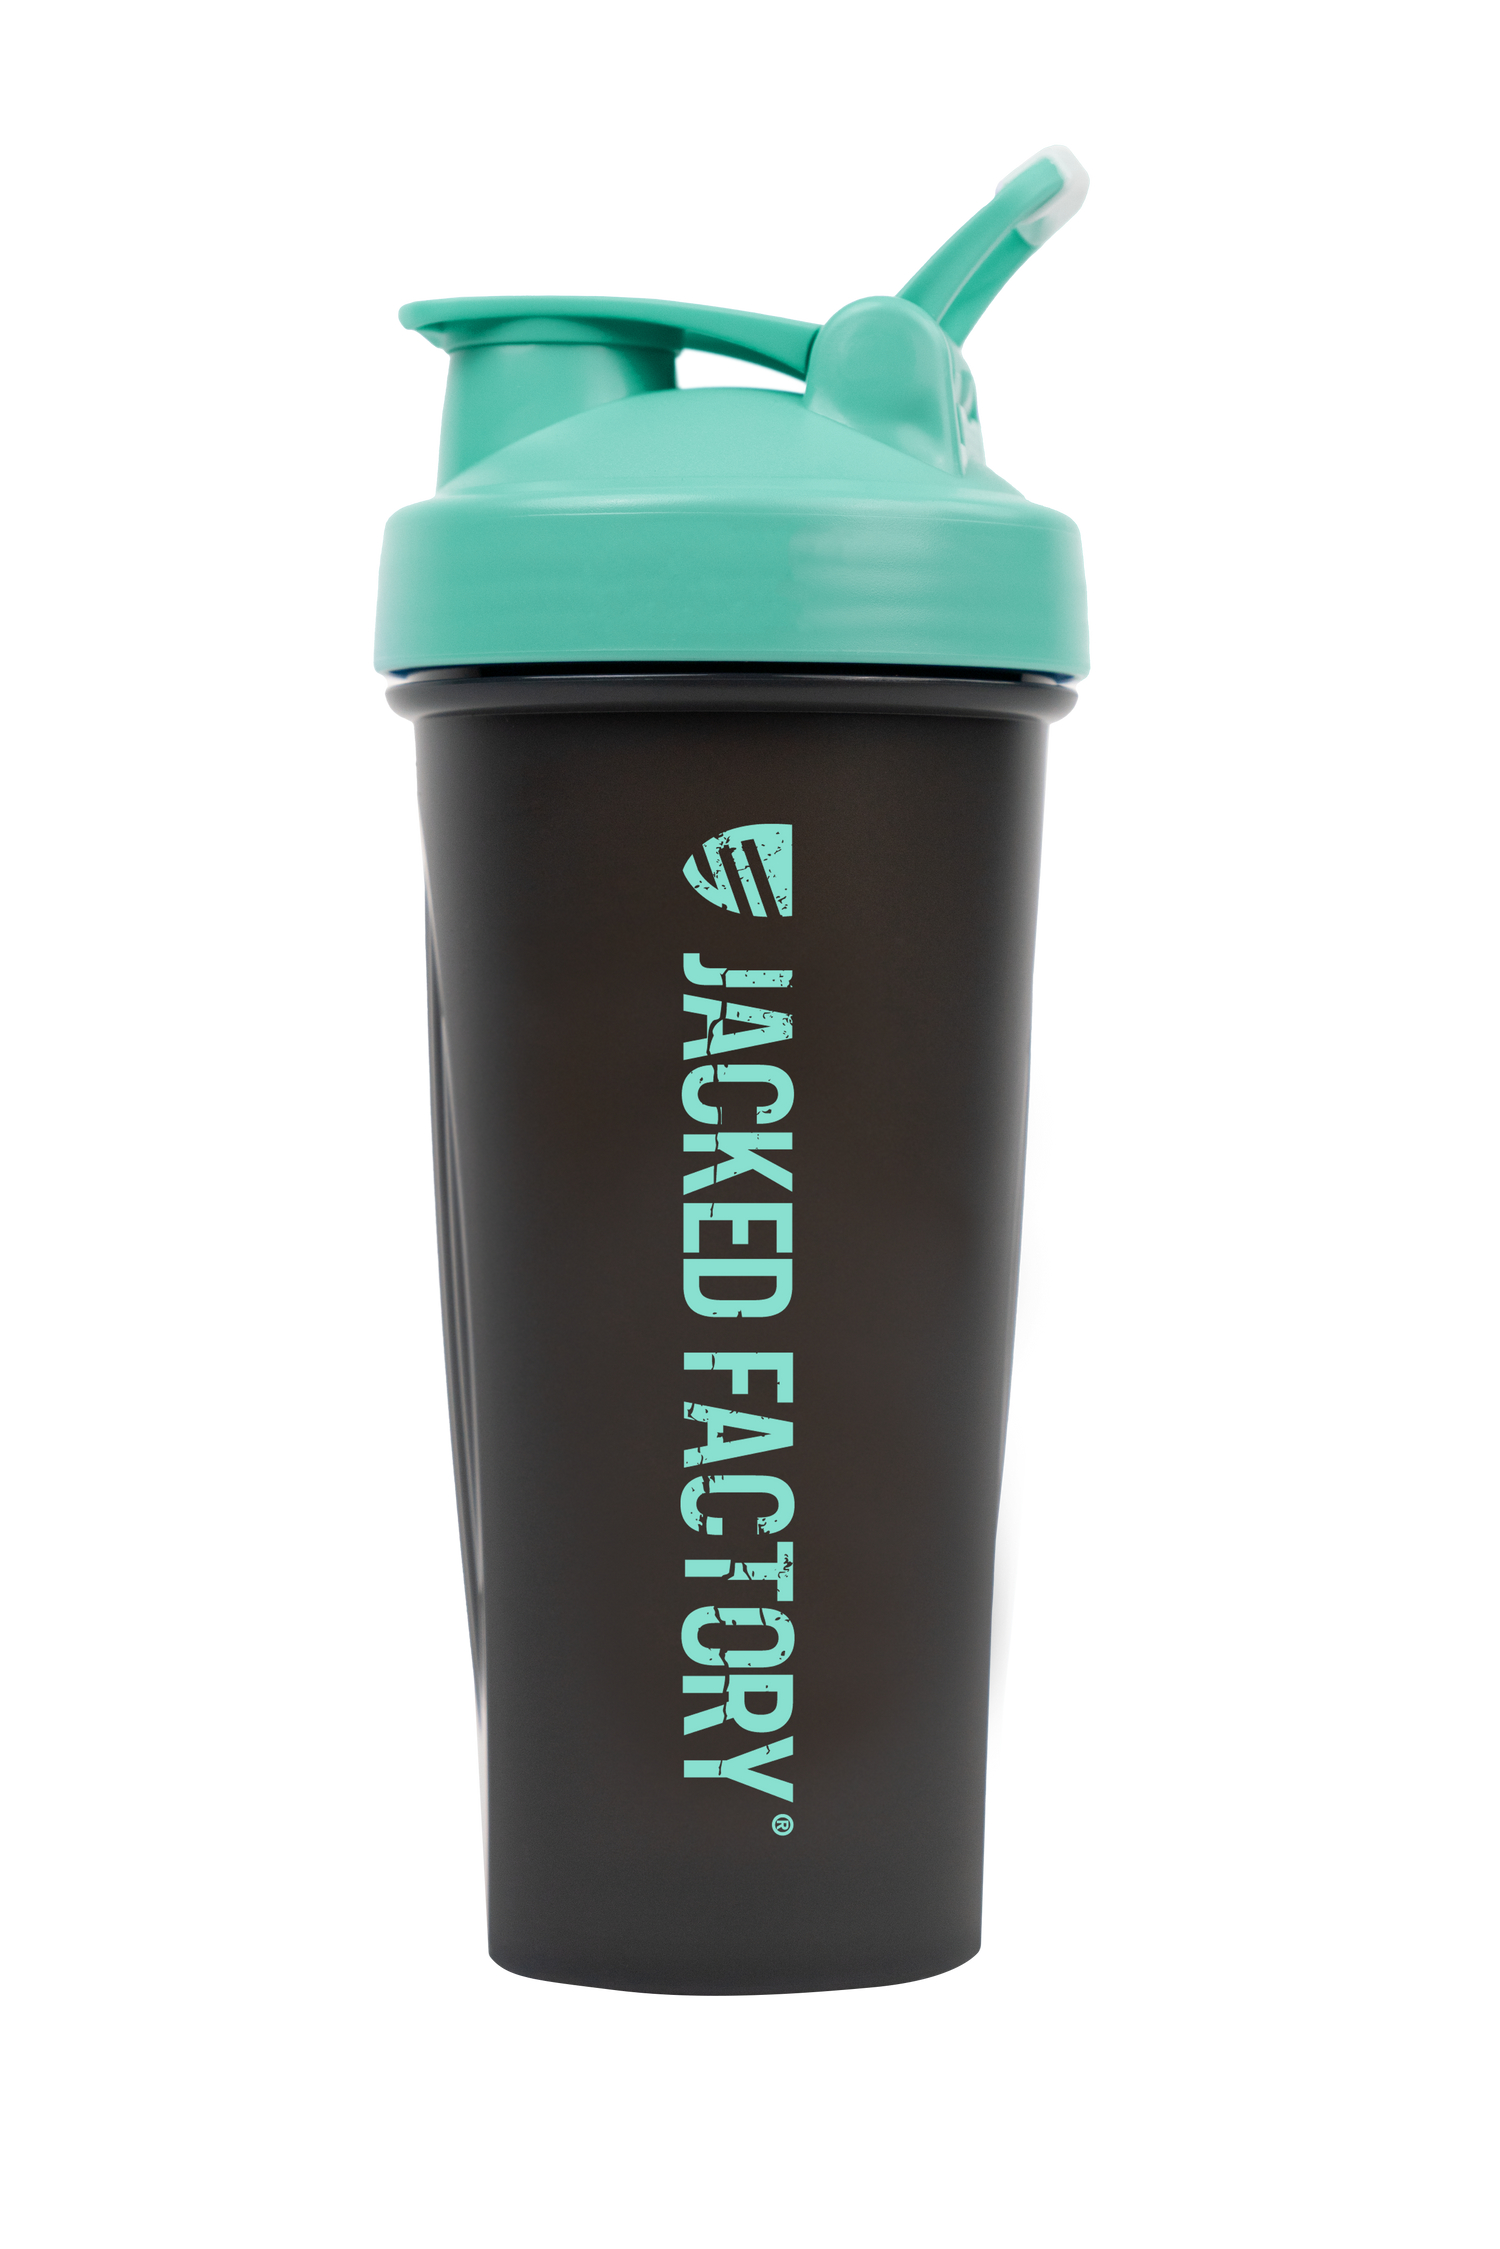 Black Jacked Factory shaker bottle with a blue top